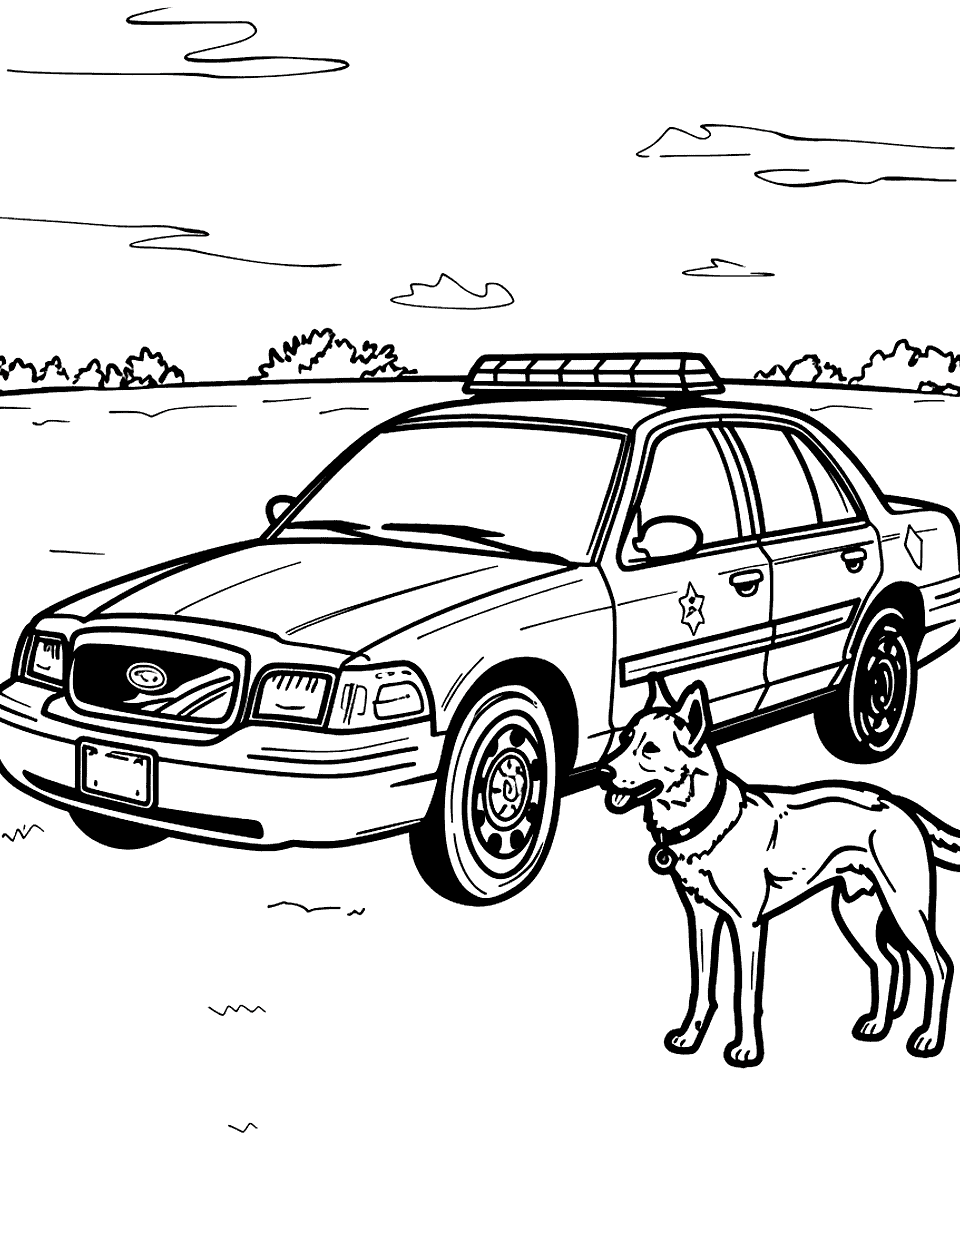 K-9 Unit in Training Police Car Coloring Page - A police dog beside their patrol car in a field.